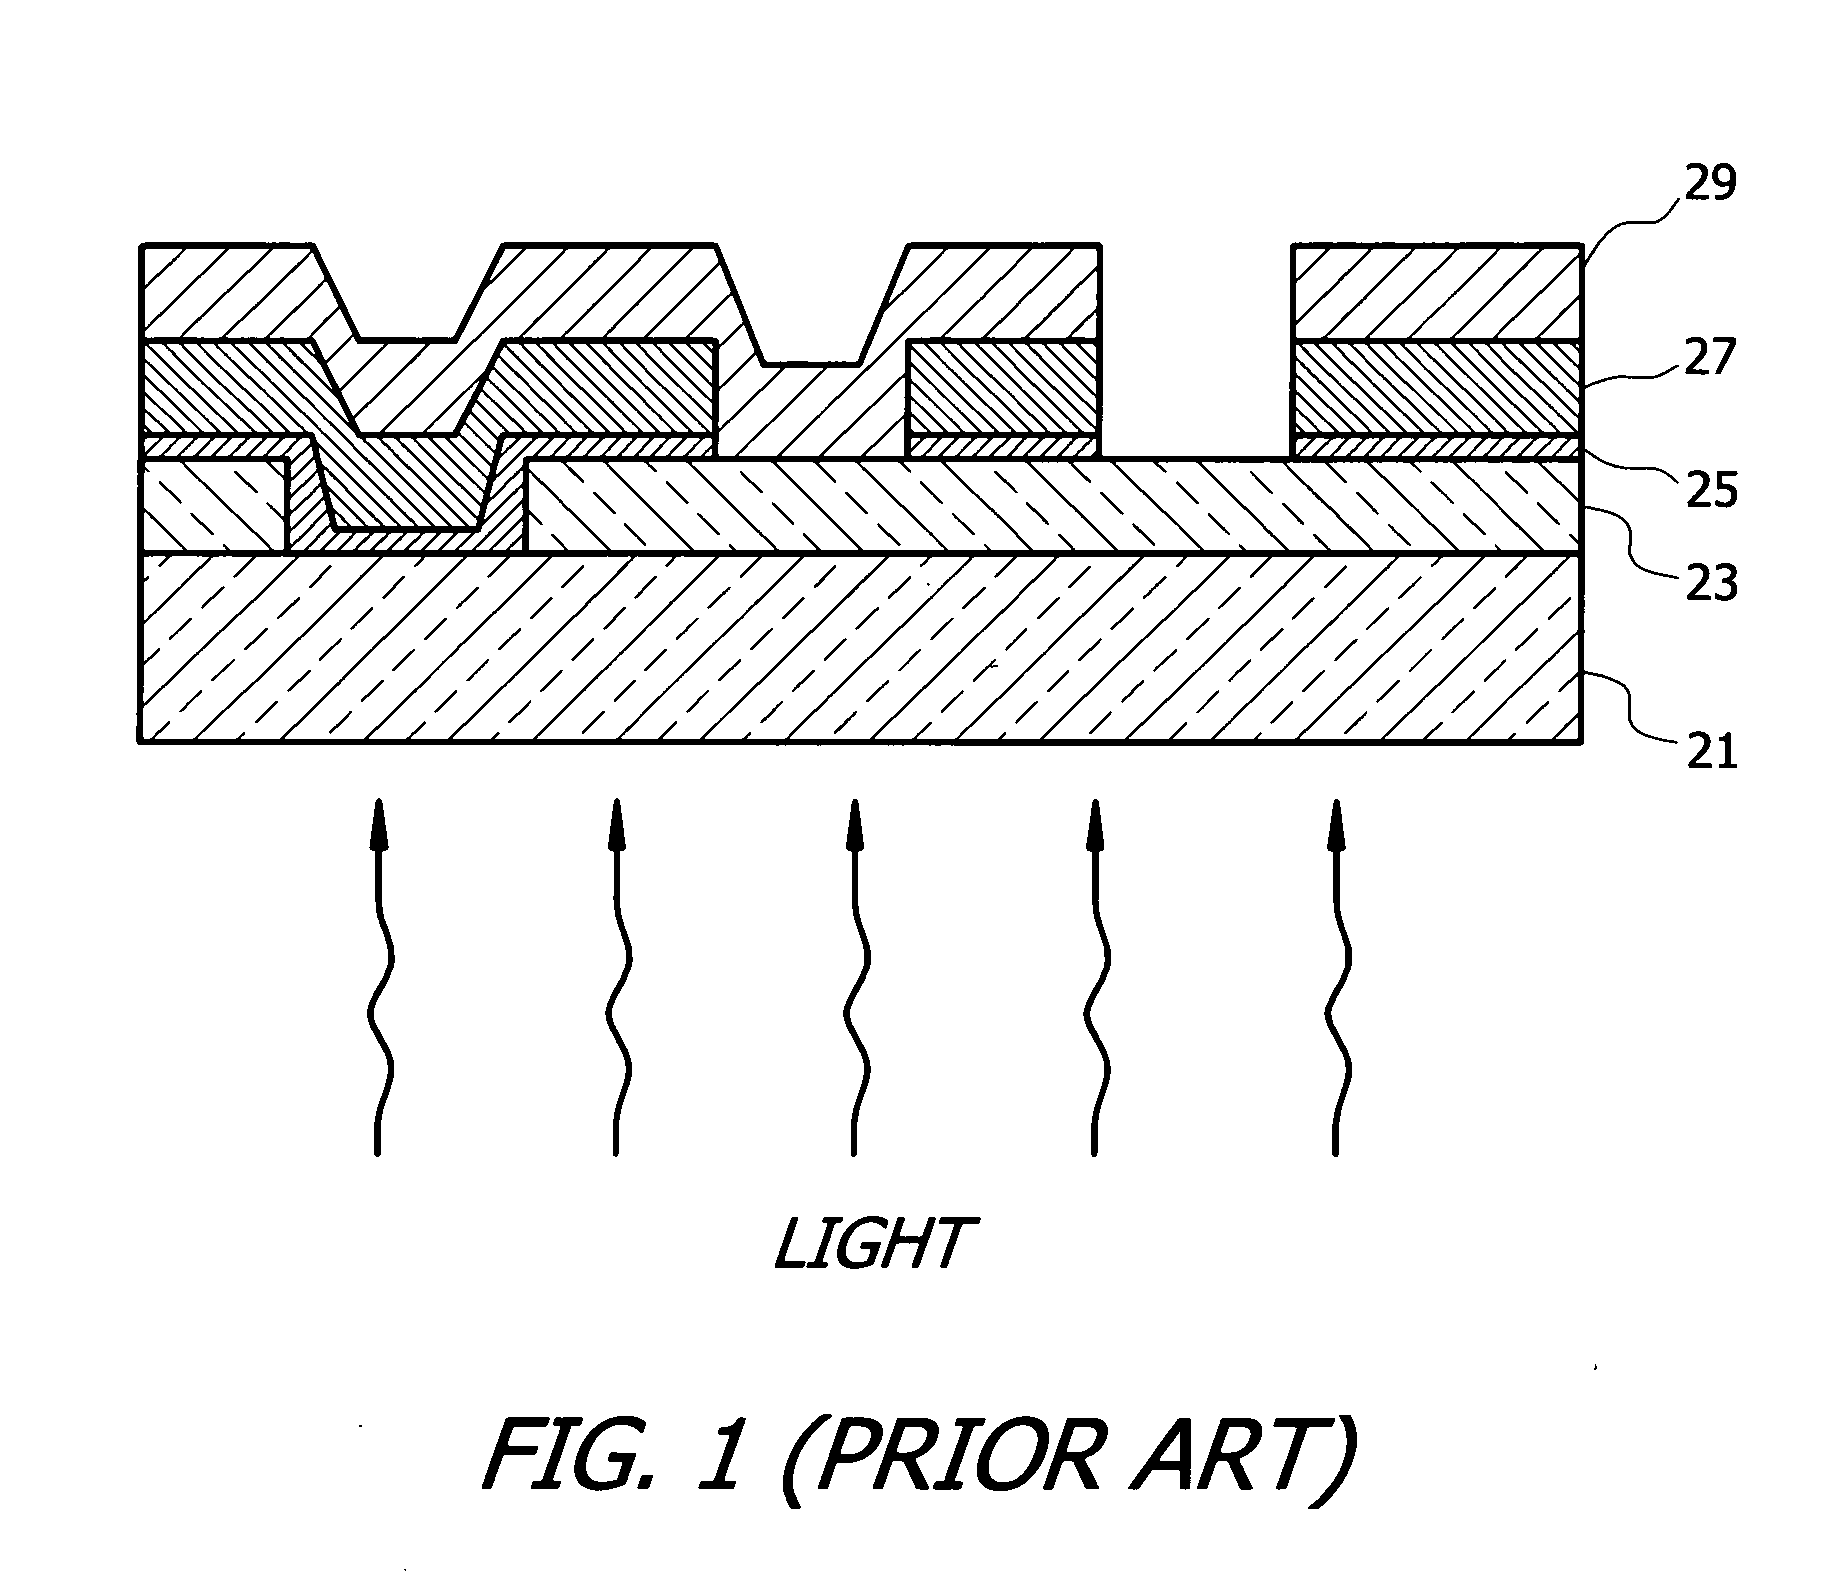 Continuous deposition process and apparatus for manufacturing cadmium telluride photovoltaic devices